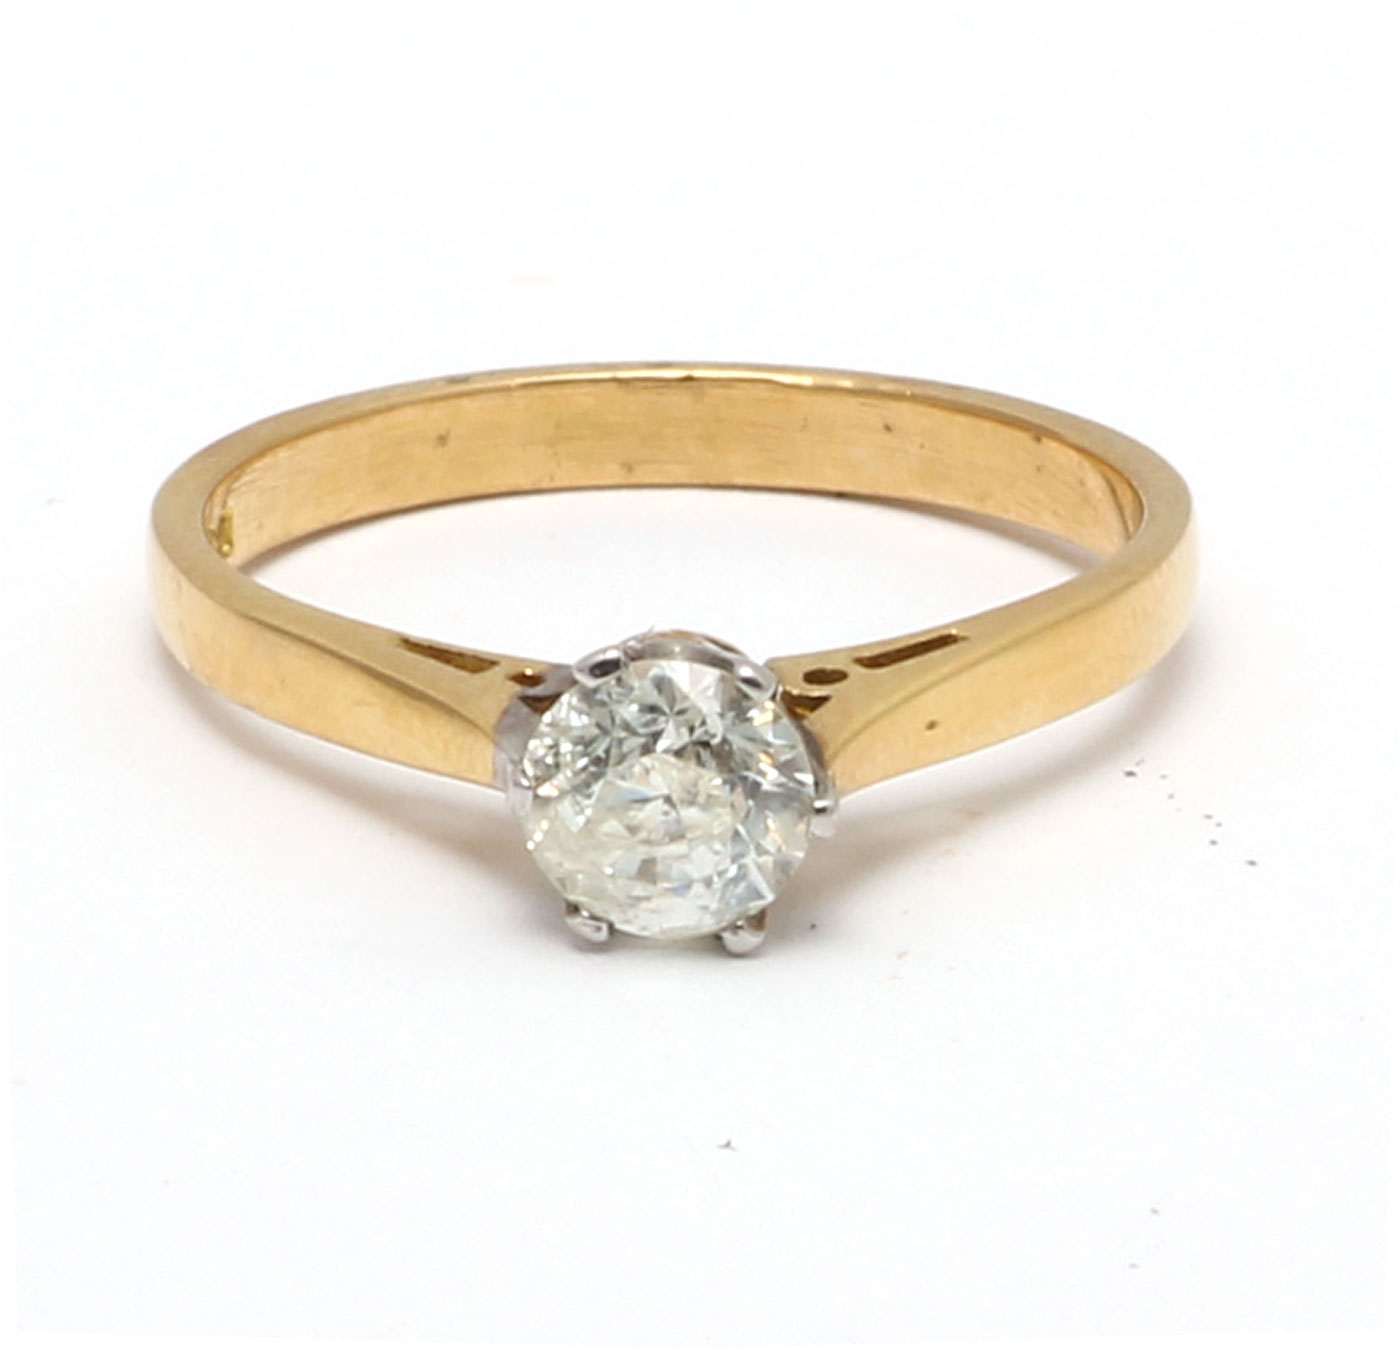 18ct Yellow Gold Diamond Engagement Ring 0.61 Carats - Valued By GIE £5,775.00 - This simple and - Image 5 of 6